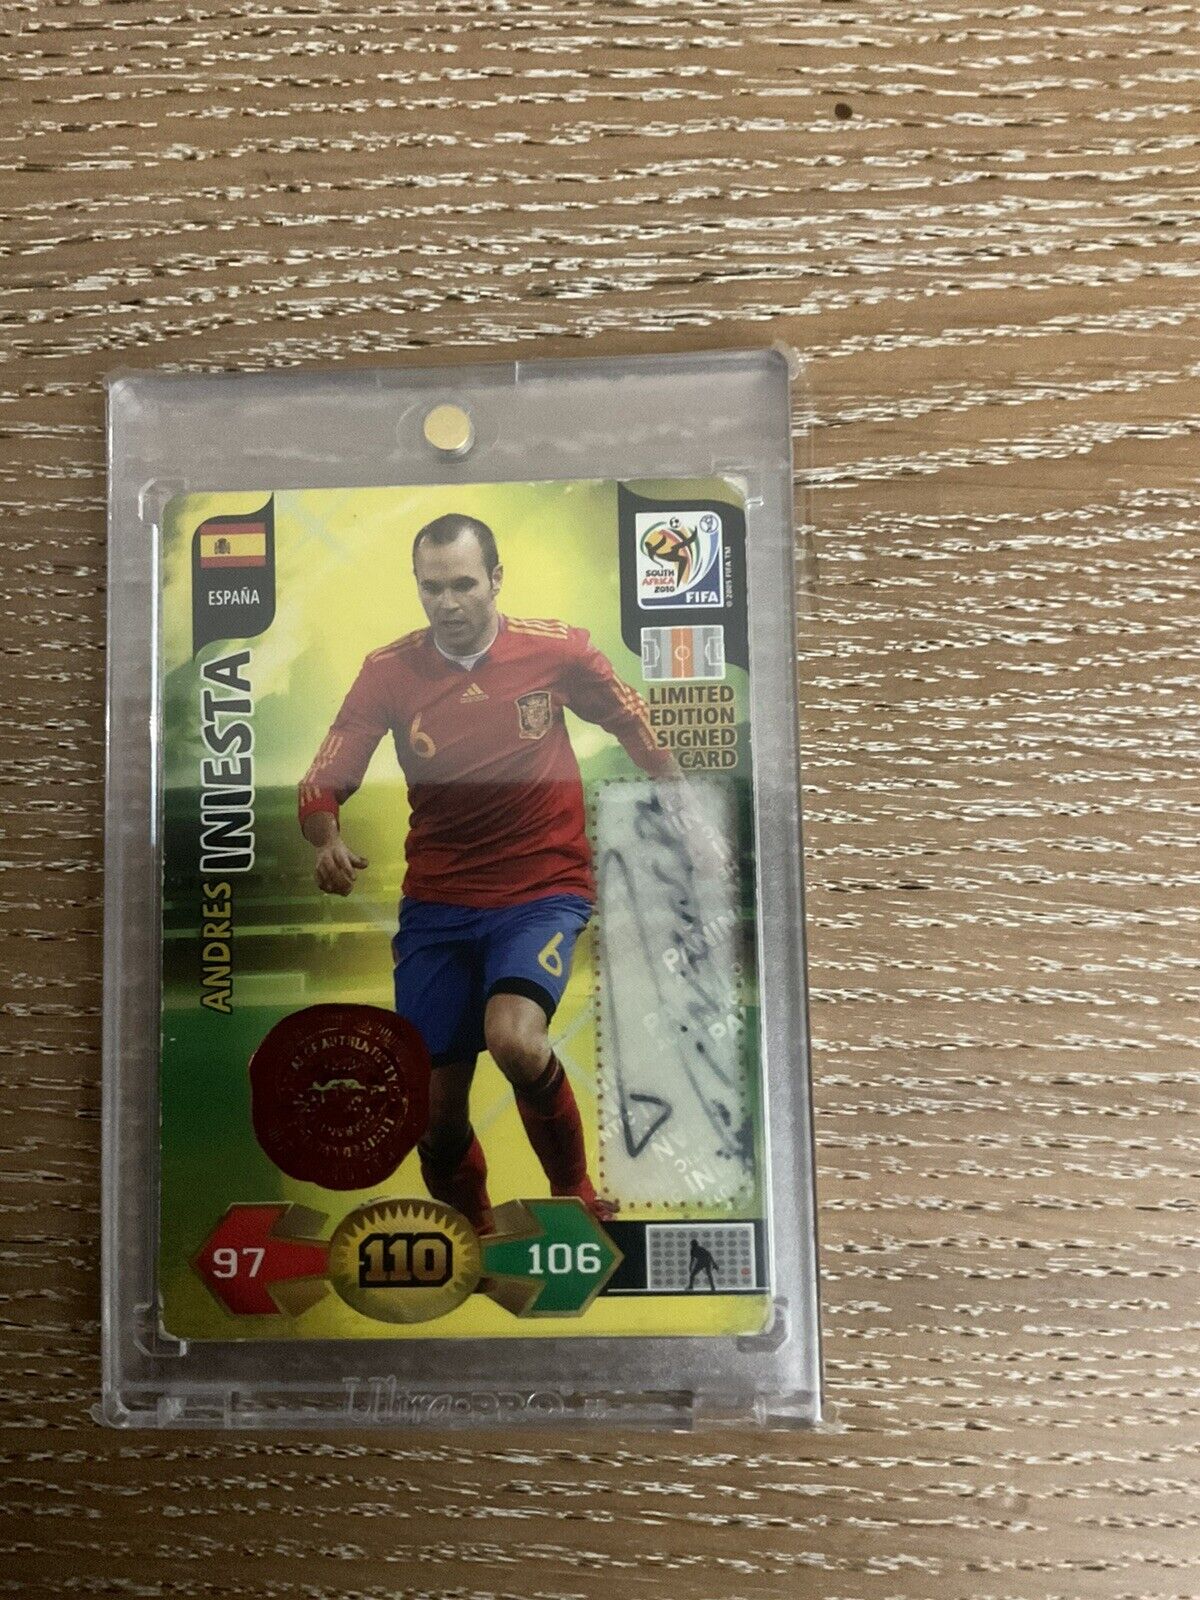 2010 Panini World Cup andres Iniesta Autograph Limited Edition 1/1